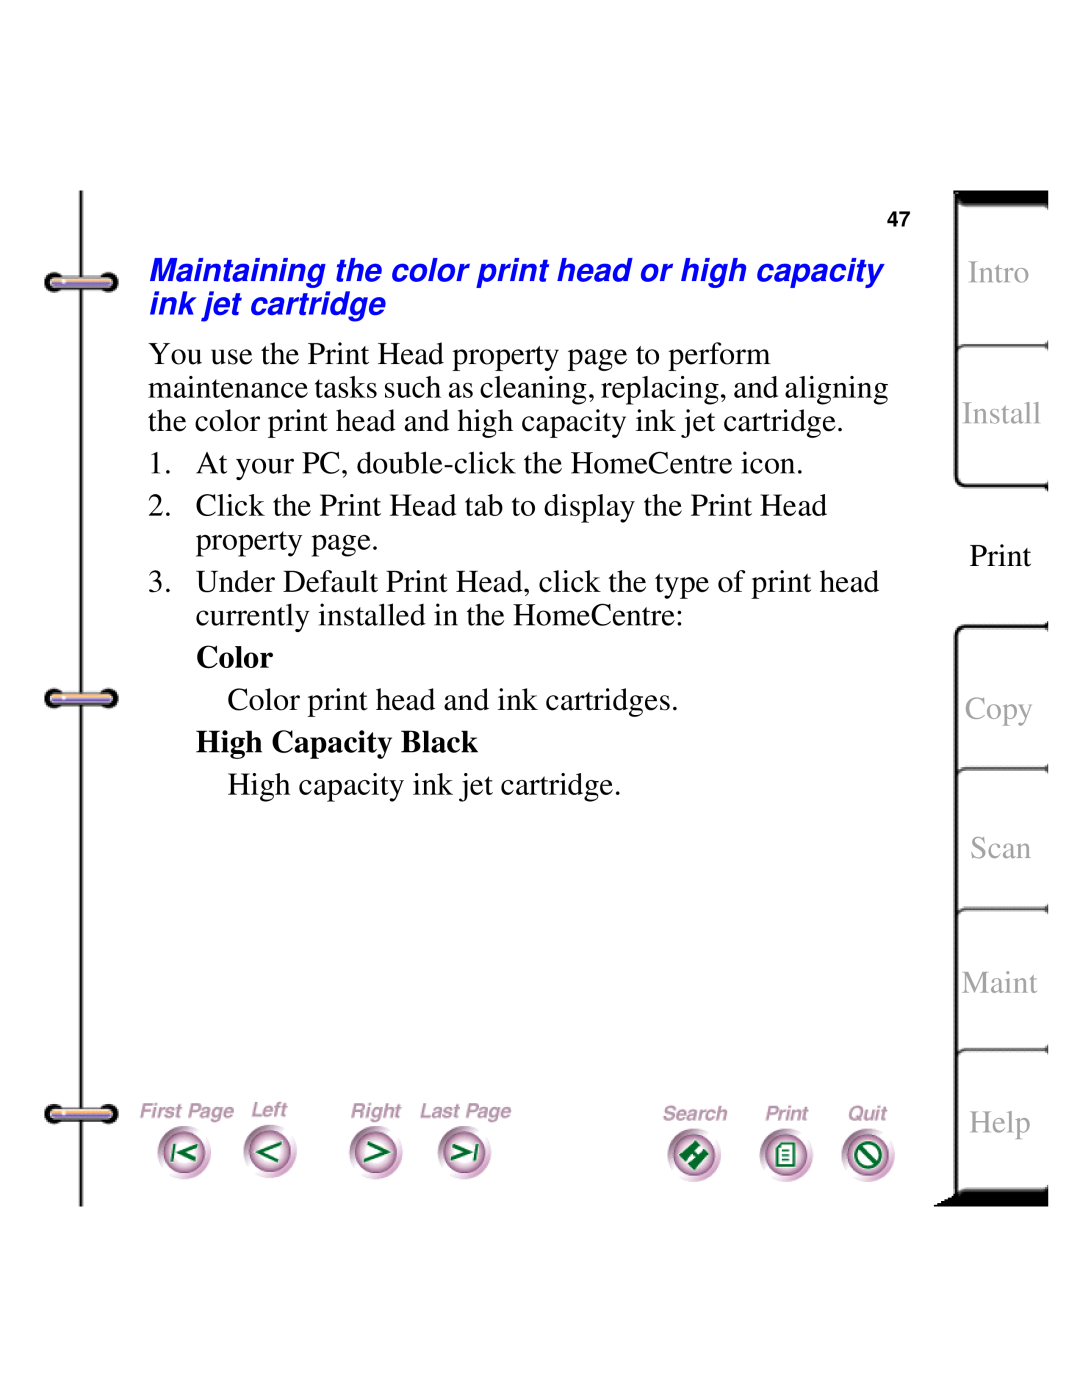 Xerox Document HomeCentre manual Color, High Capacity Black, Intro Install, Copy Scan Maint, Help 